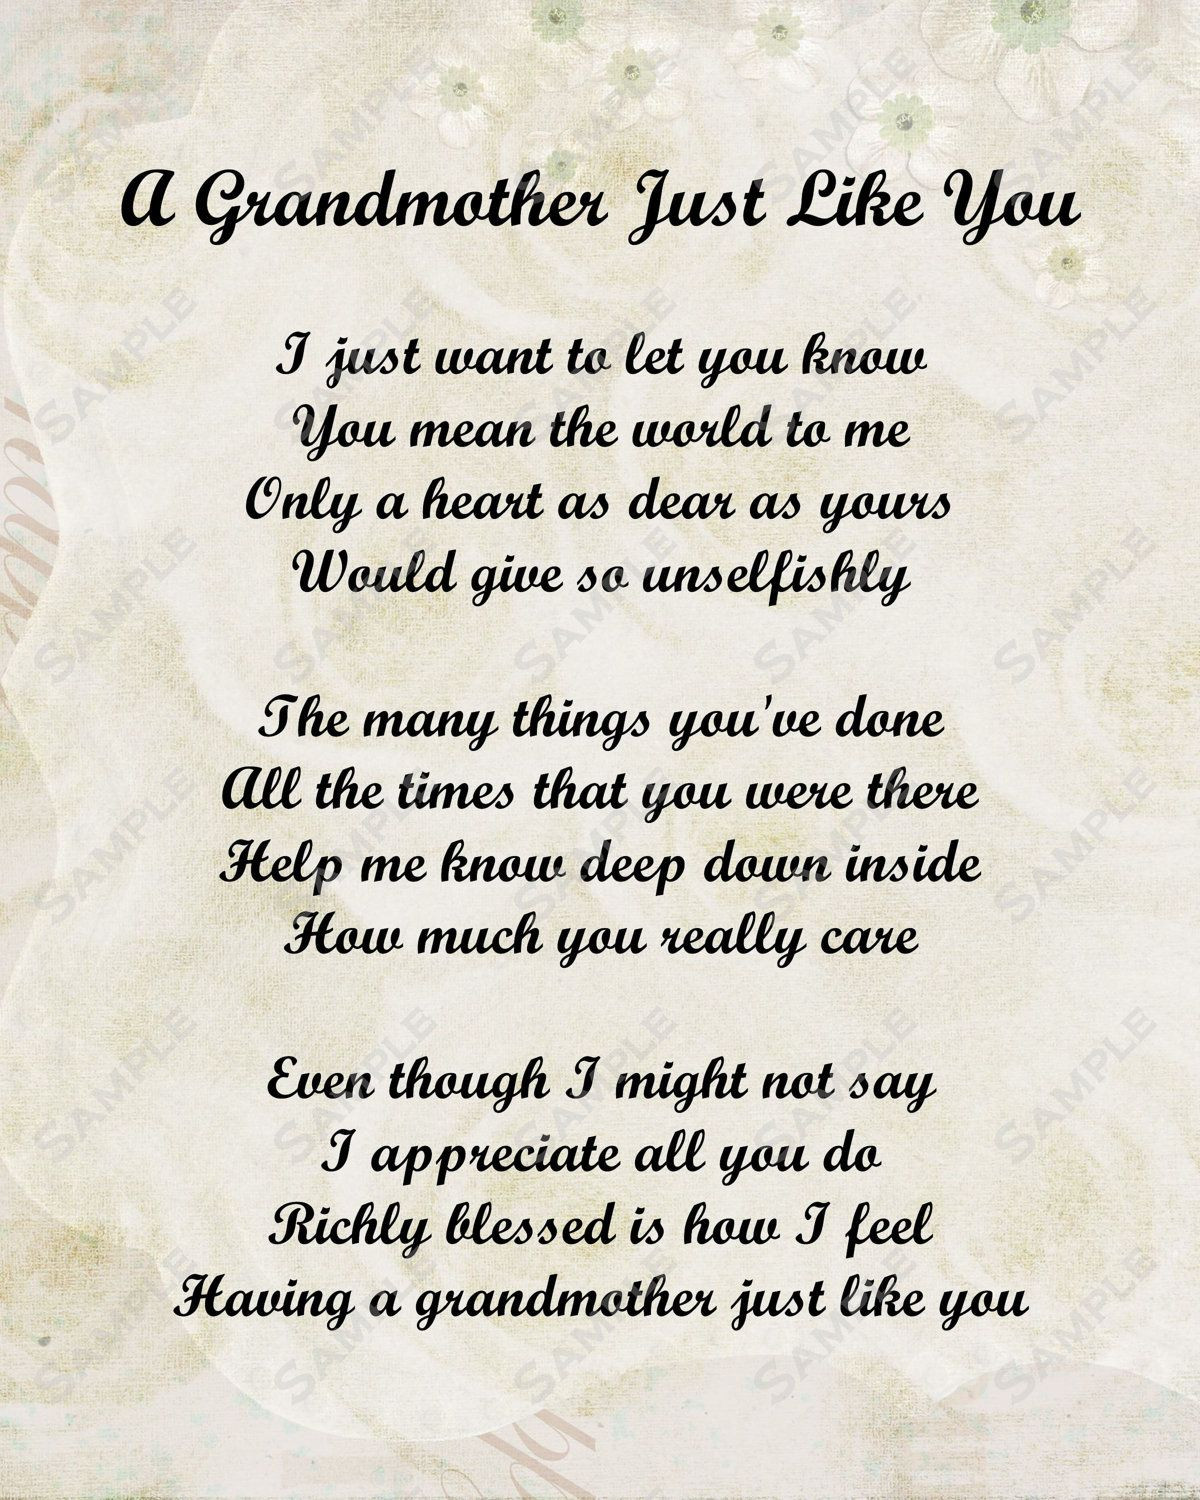 Grandmother Passing Away Quotes
 Grandmother Poem on Pinterest